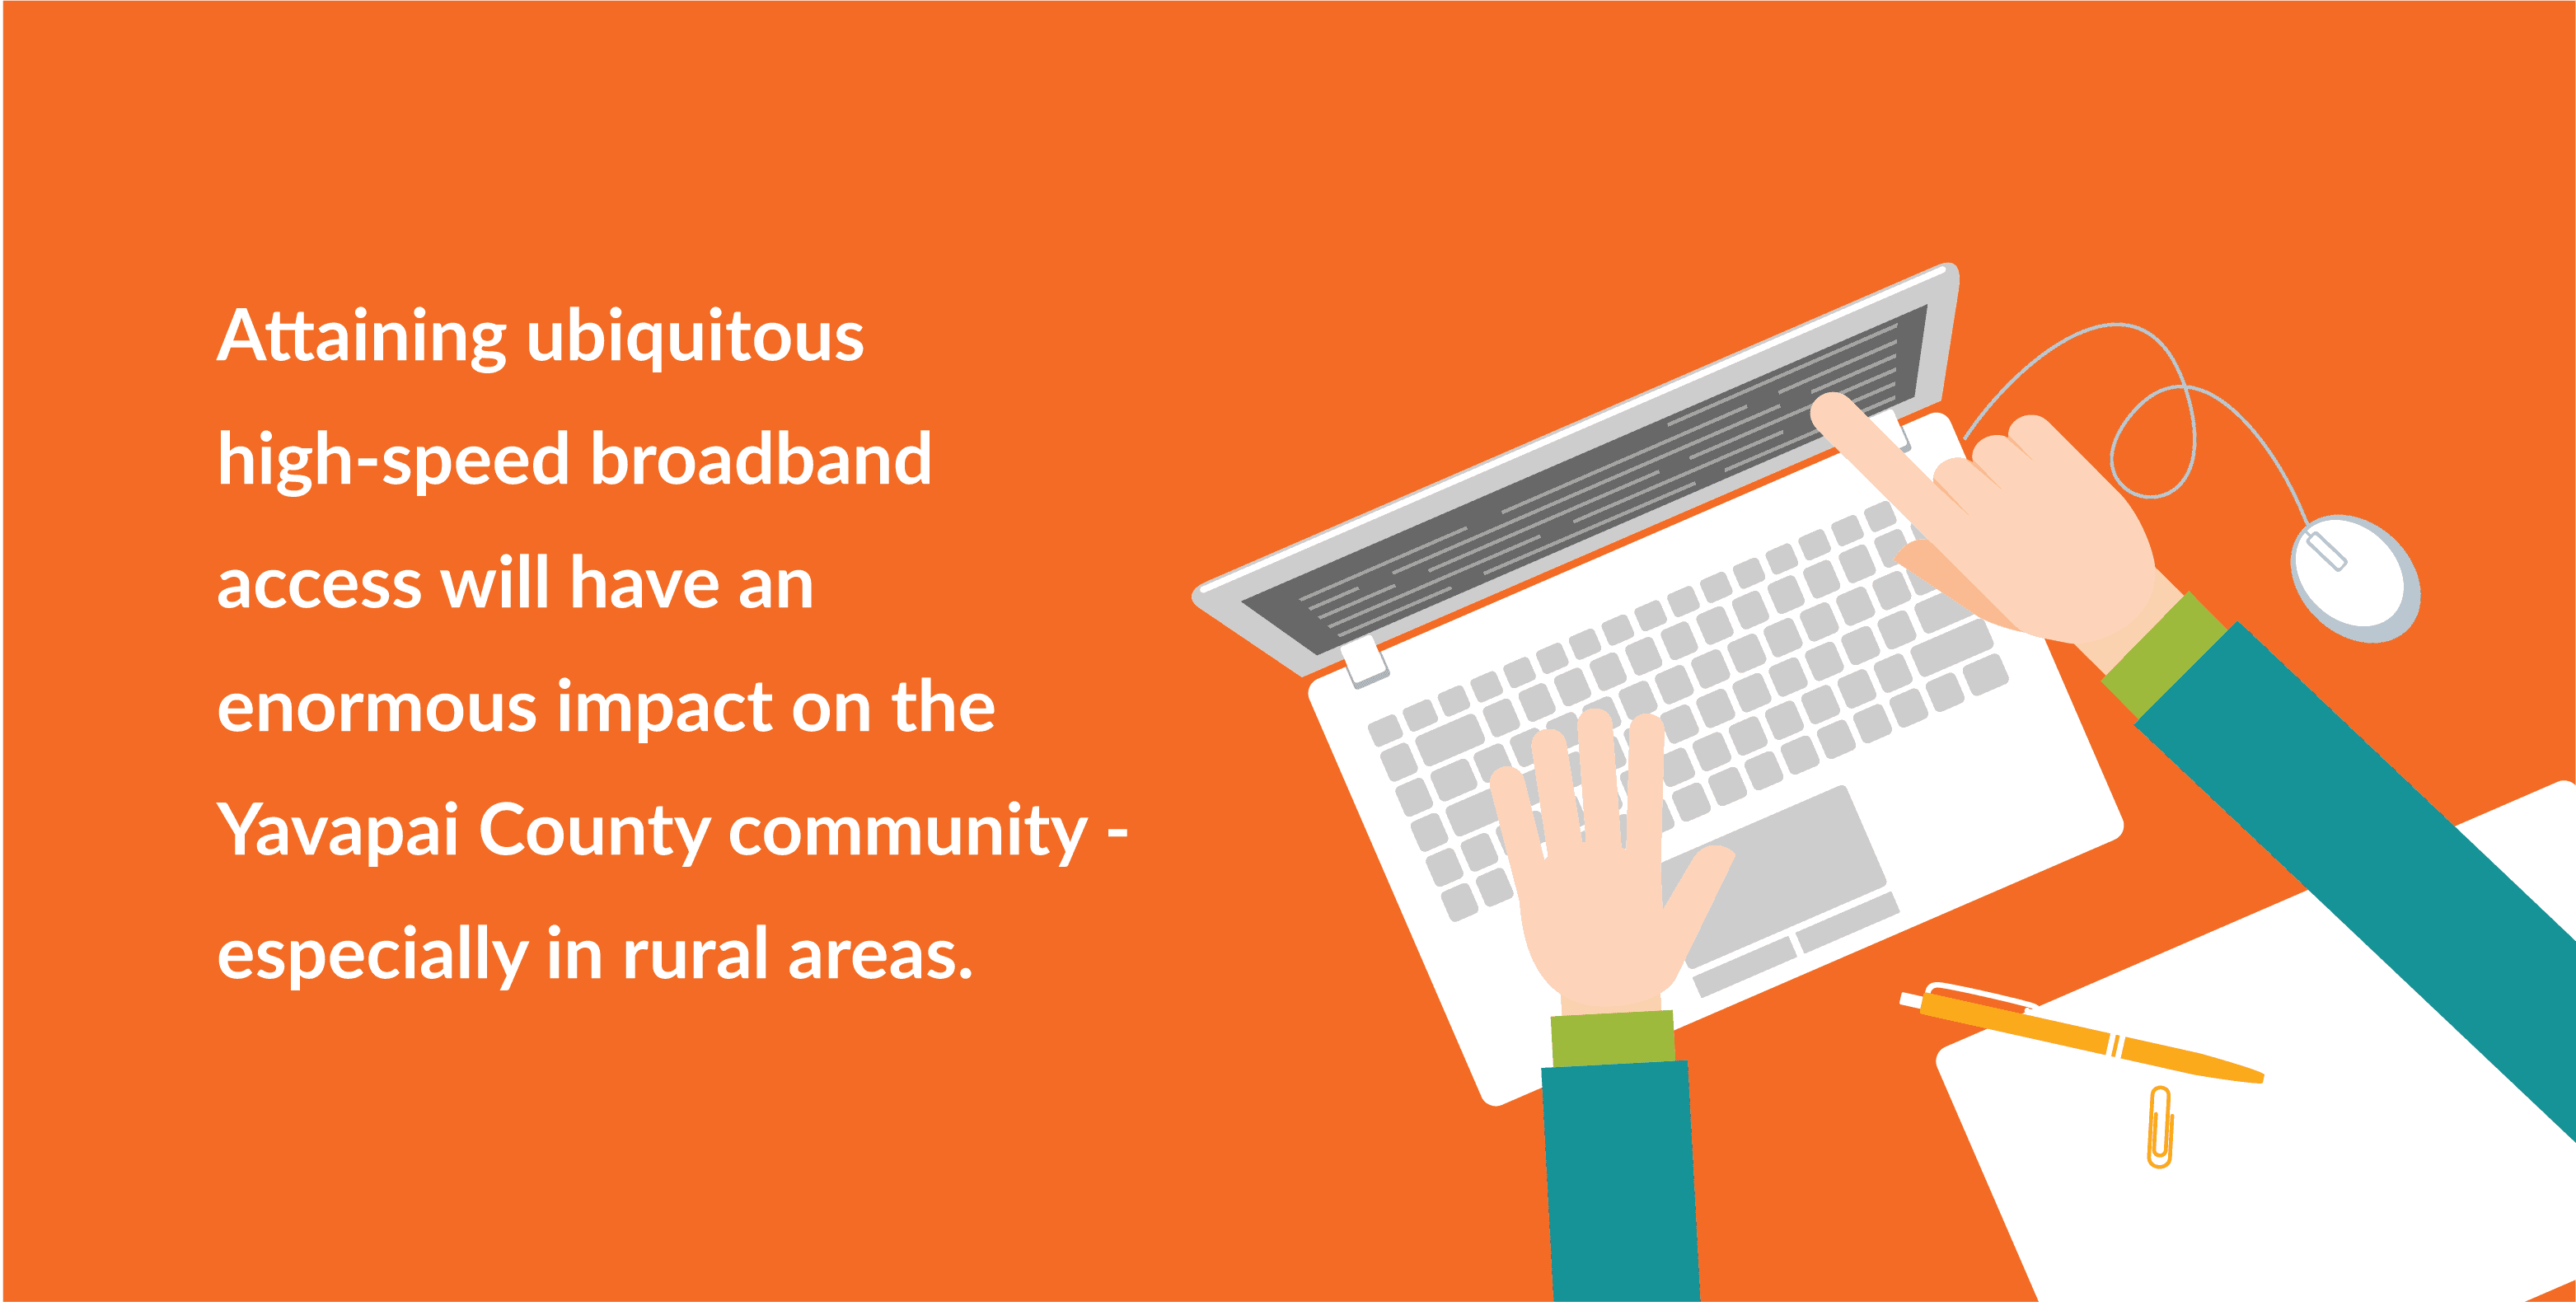 Attaining ubiquitous high-speed broadband access will have an enormous impact on the Yavapai County community - especially in rural areas